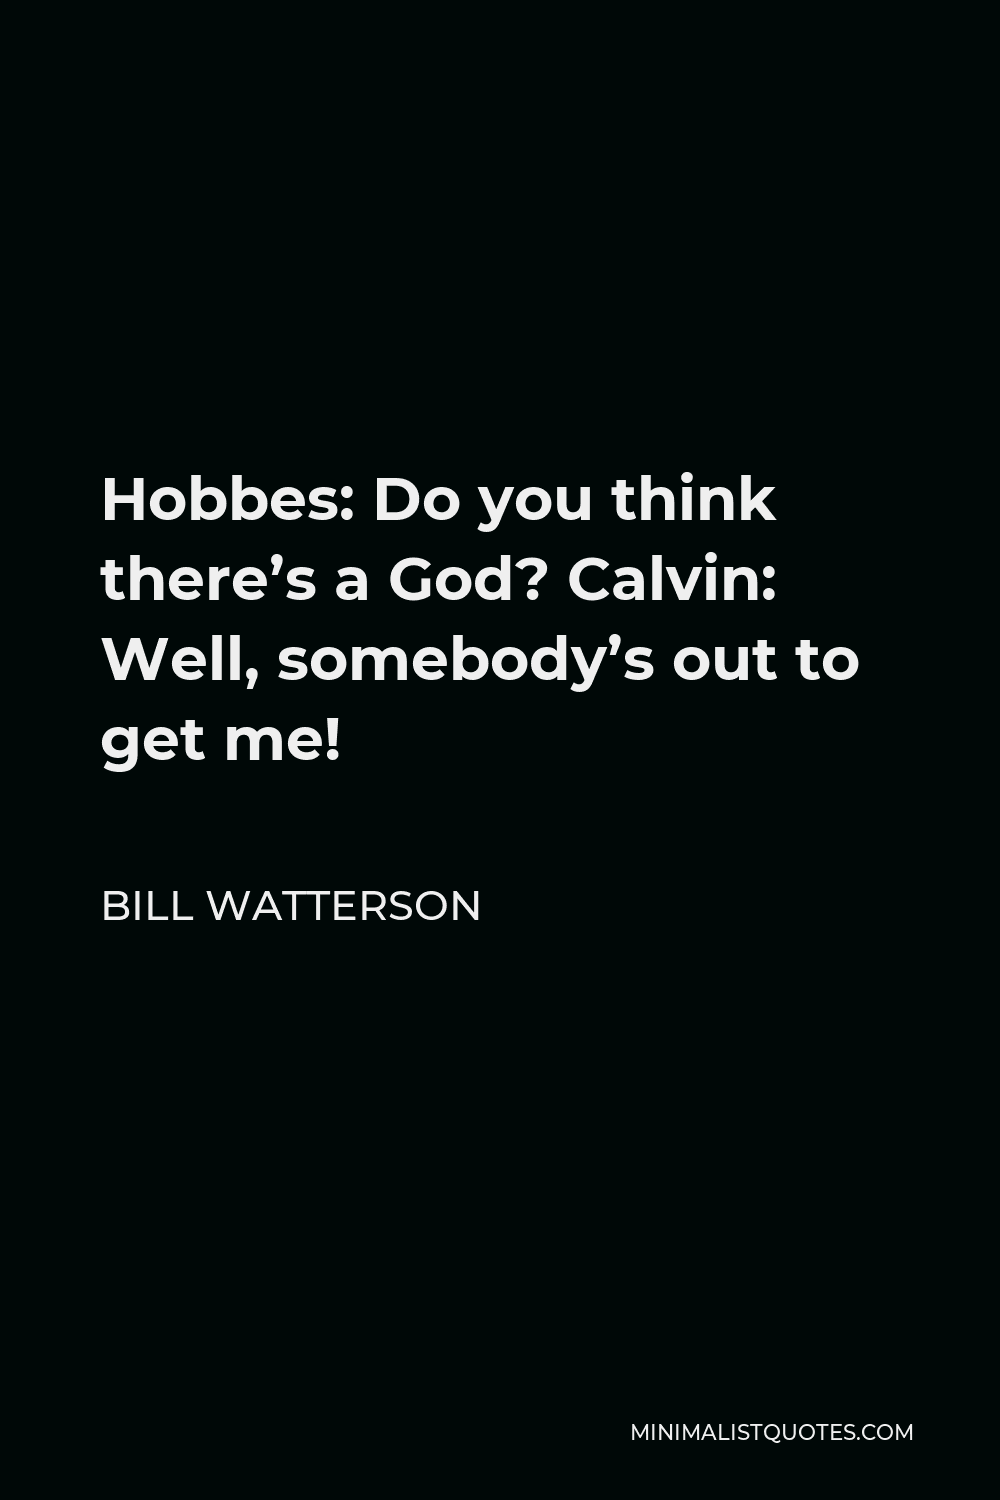 Bill Watterson Quote - Hobbes: Do you think there’s a God? Calvin: Well, somebody’s out to get me!